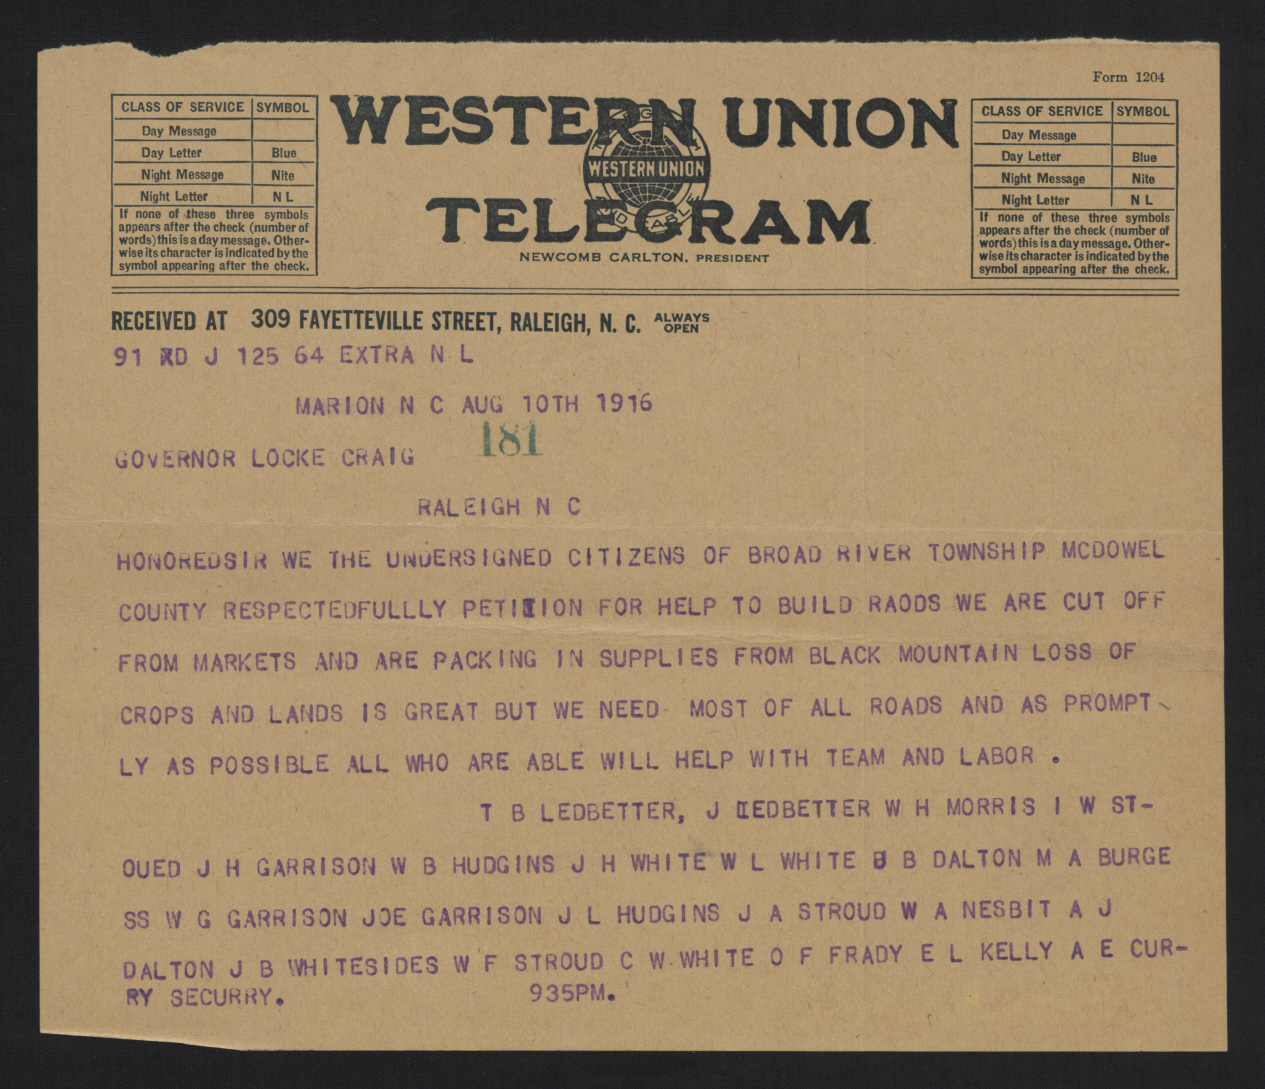 Telegram from the Citizens of Broad River Township to Locke Craig, August 10, 1916